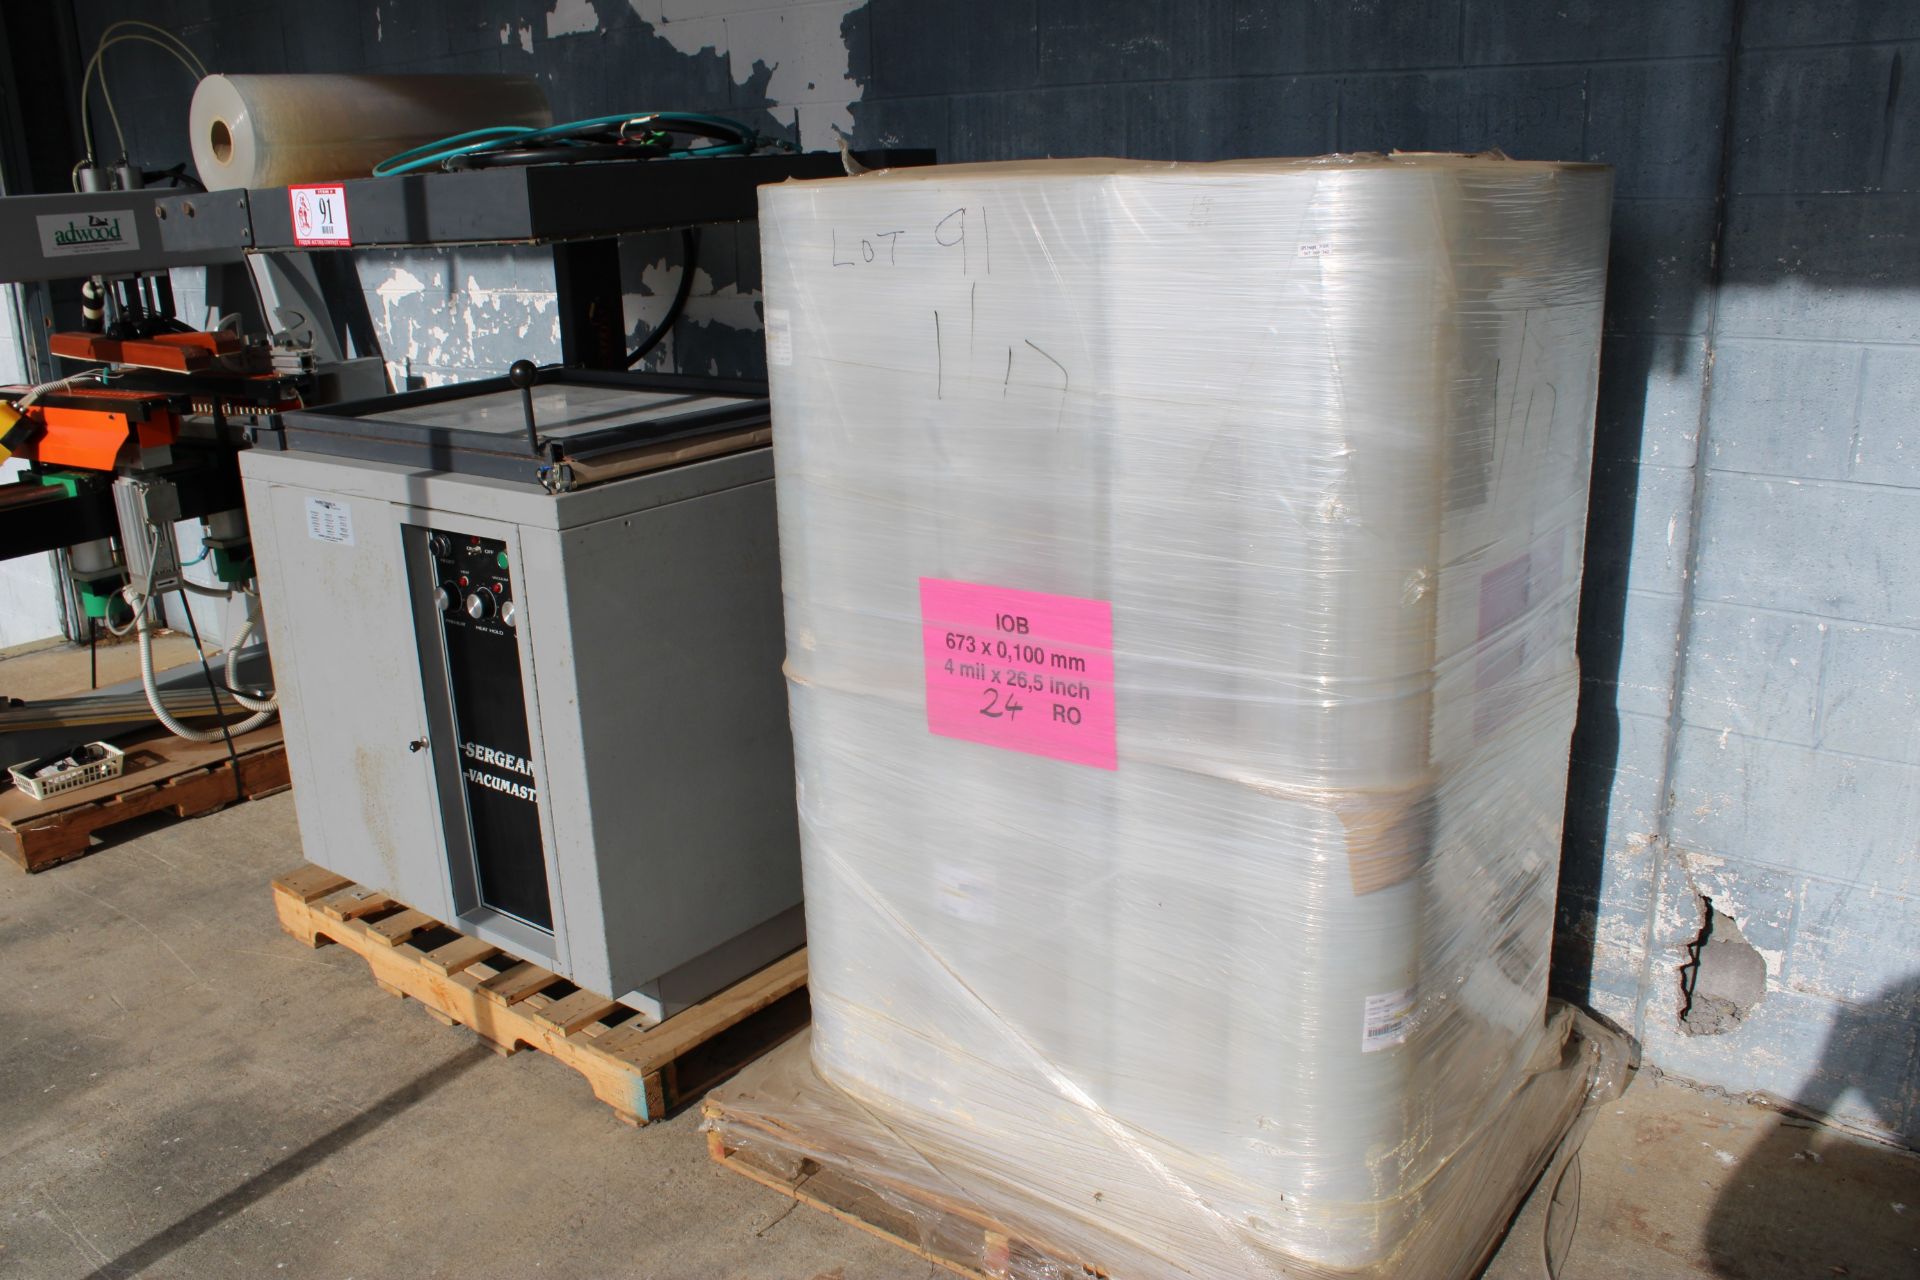 Eaton Sergeant Vacumaster w/ 24 Shrink Wrap Rolls, 230v 3 Phase, 24" x 30" bed that is perfect for - Image 2 of 2